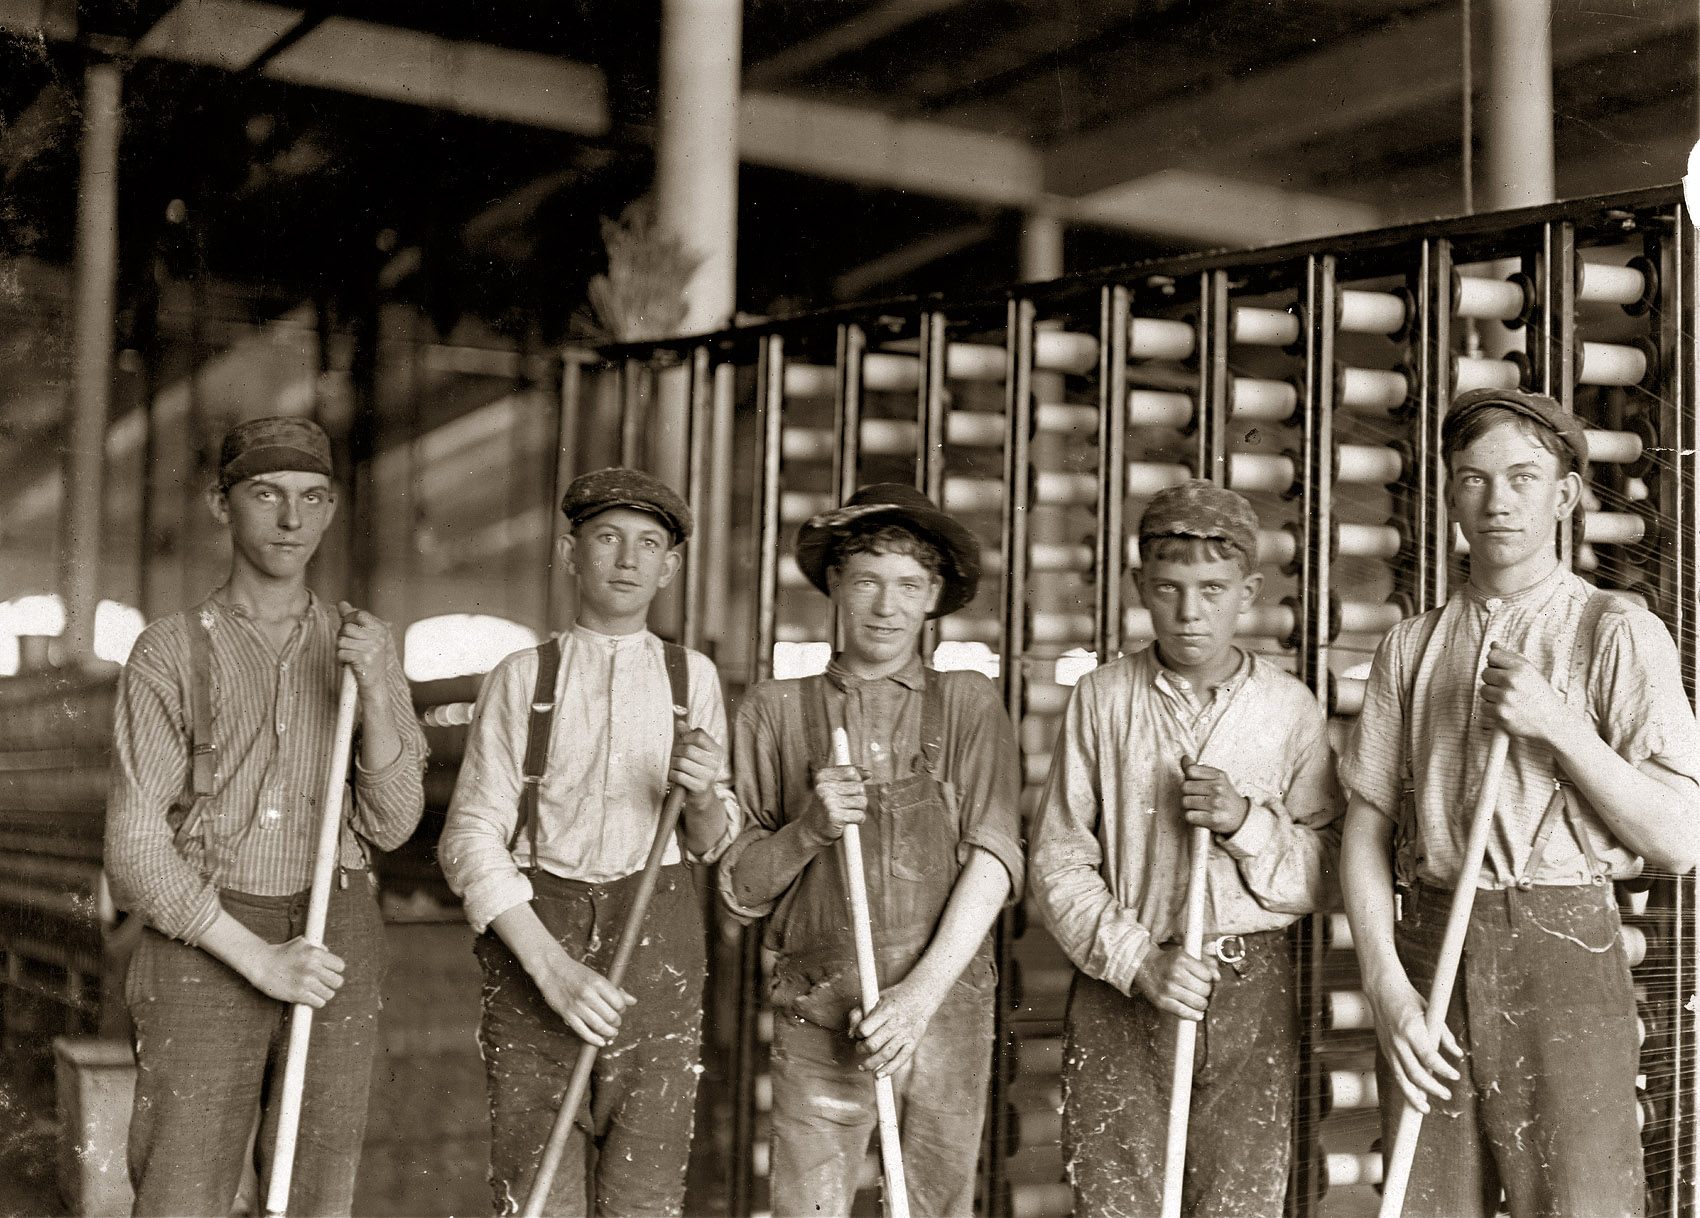 November 1908. "Some Sweepers in a North Carolina cotton mill." Photograph by Lewis Wickes Hine for the National Child Labor Committee. View full size.